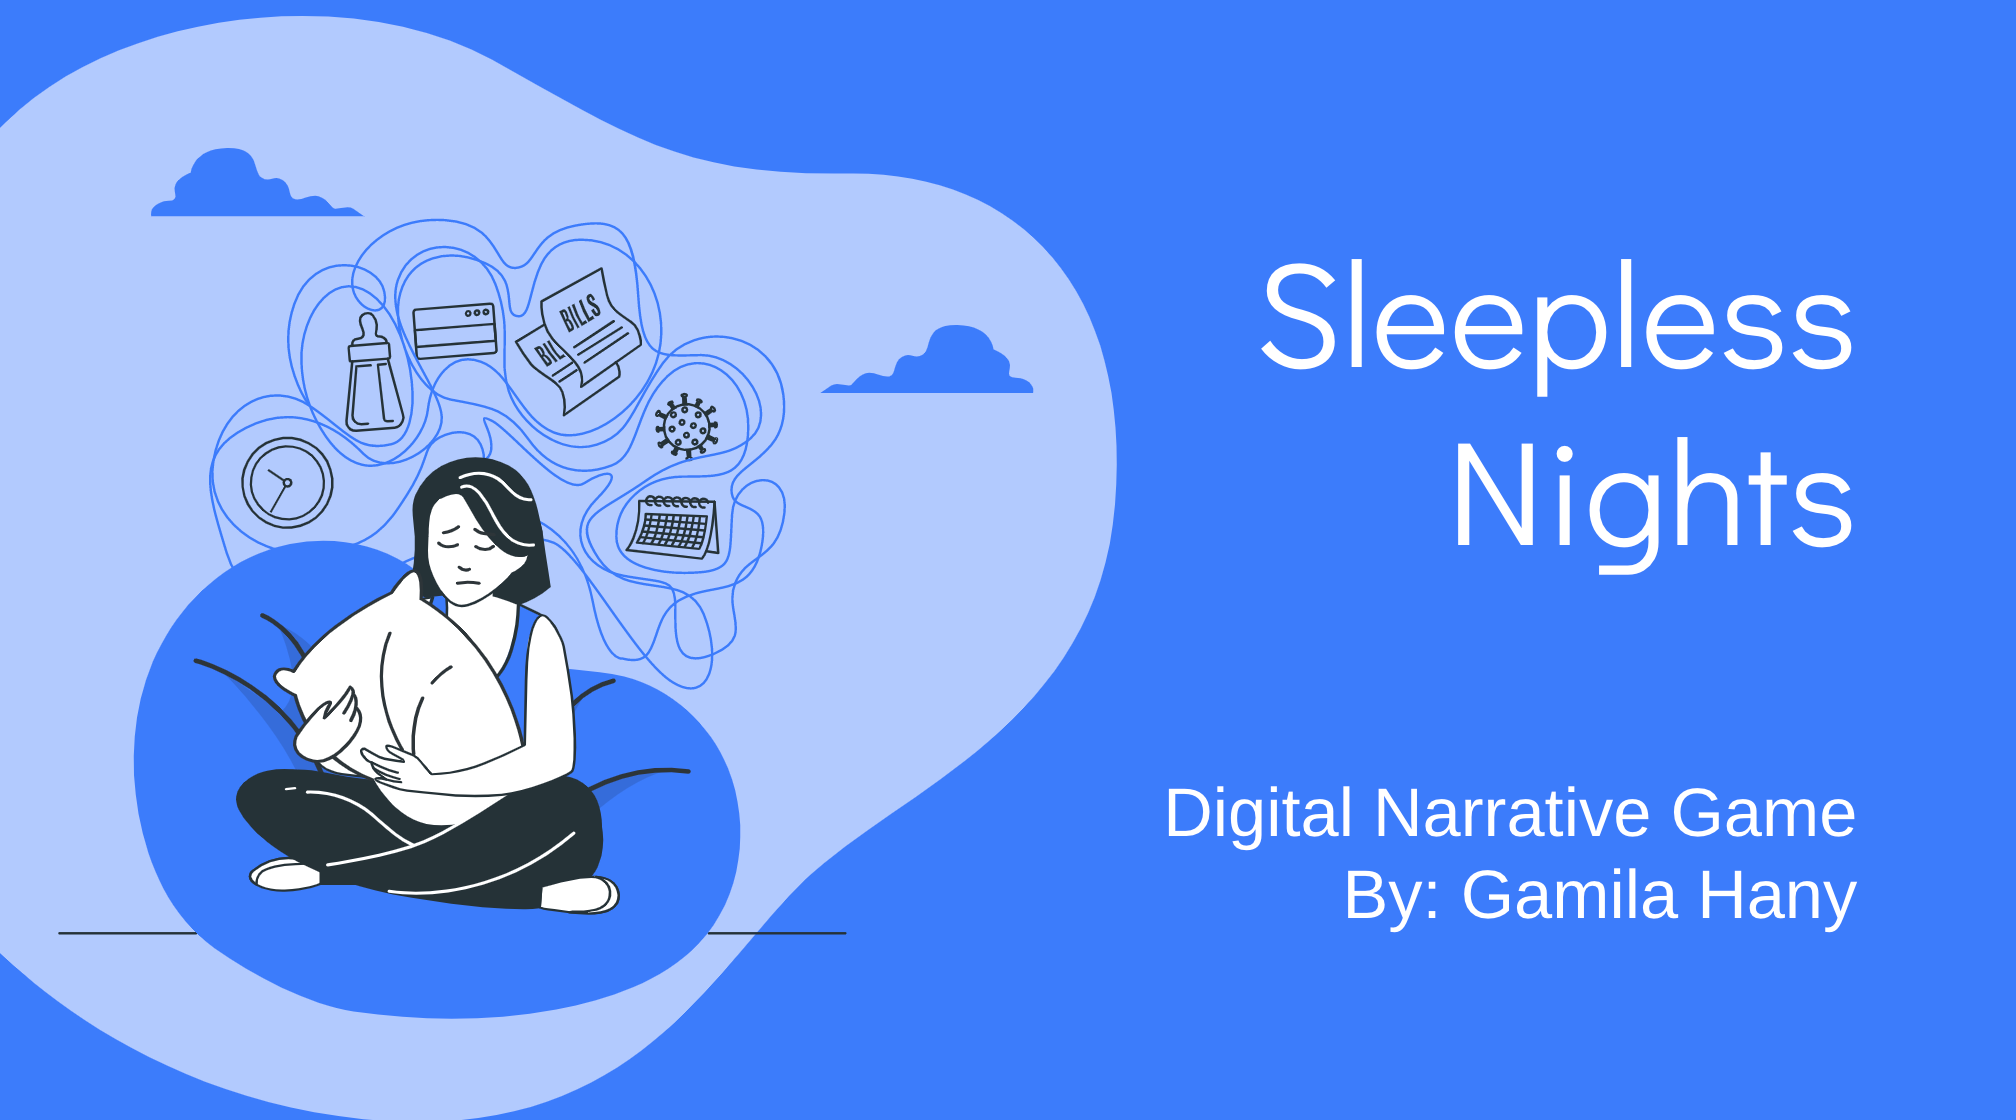 Image of the first slide in my game, includes illustration of a person unable to sleep and the title of my game "sleepless nights".